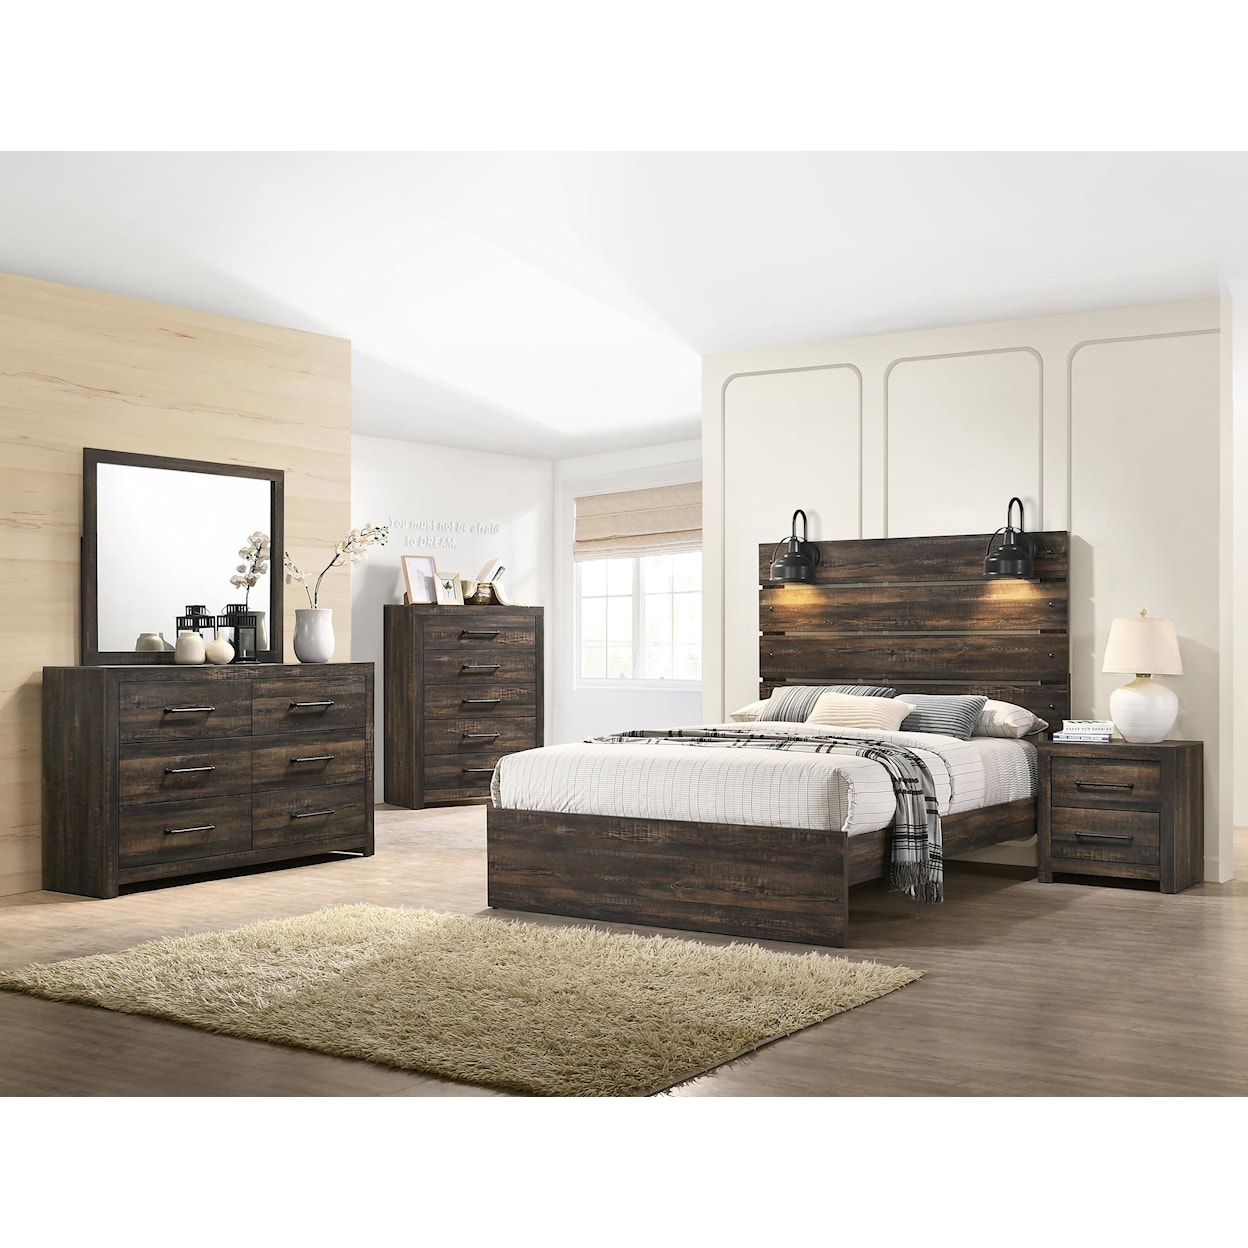 Lifestyle 0399 5 Piece Full Bedroom Set with Dresser